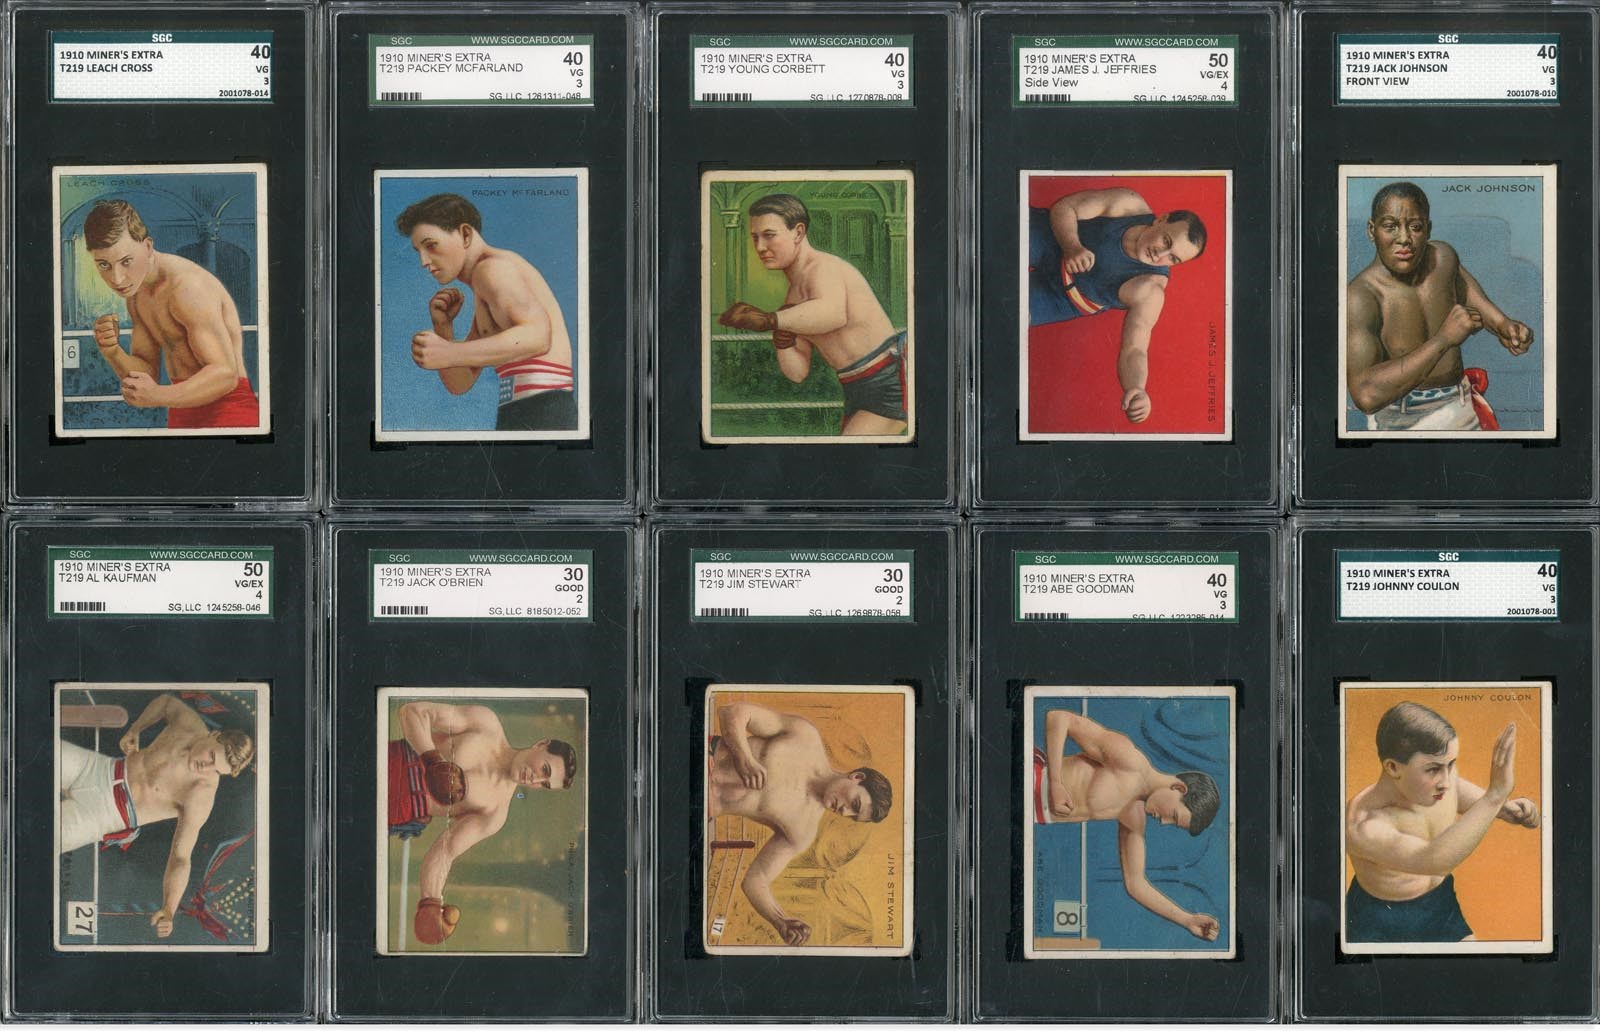 Best of the Best - Rare 1910 Miner's Extra T219 Boxing Card Complete Set - #1 on SGC Registry